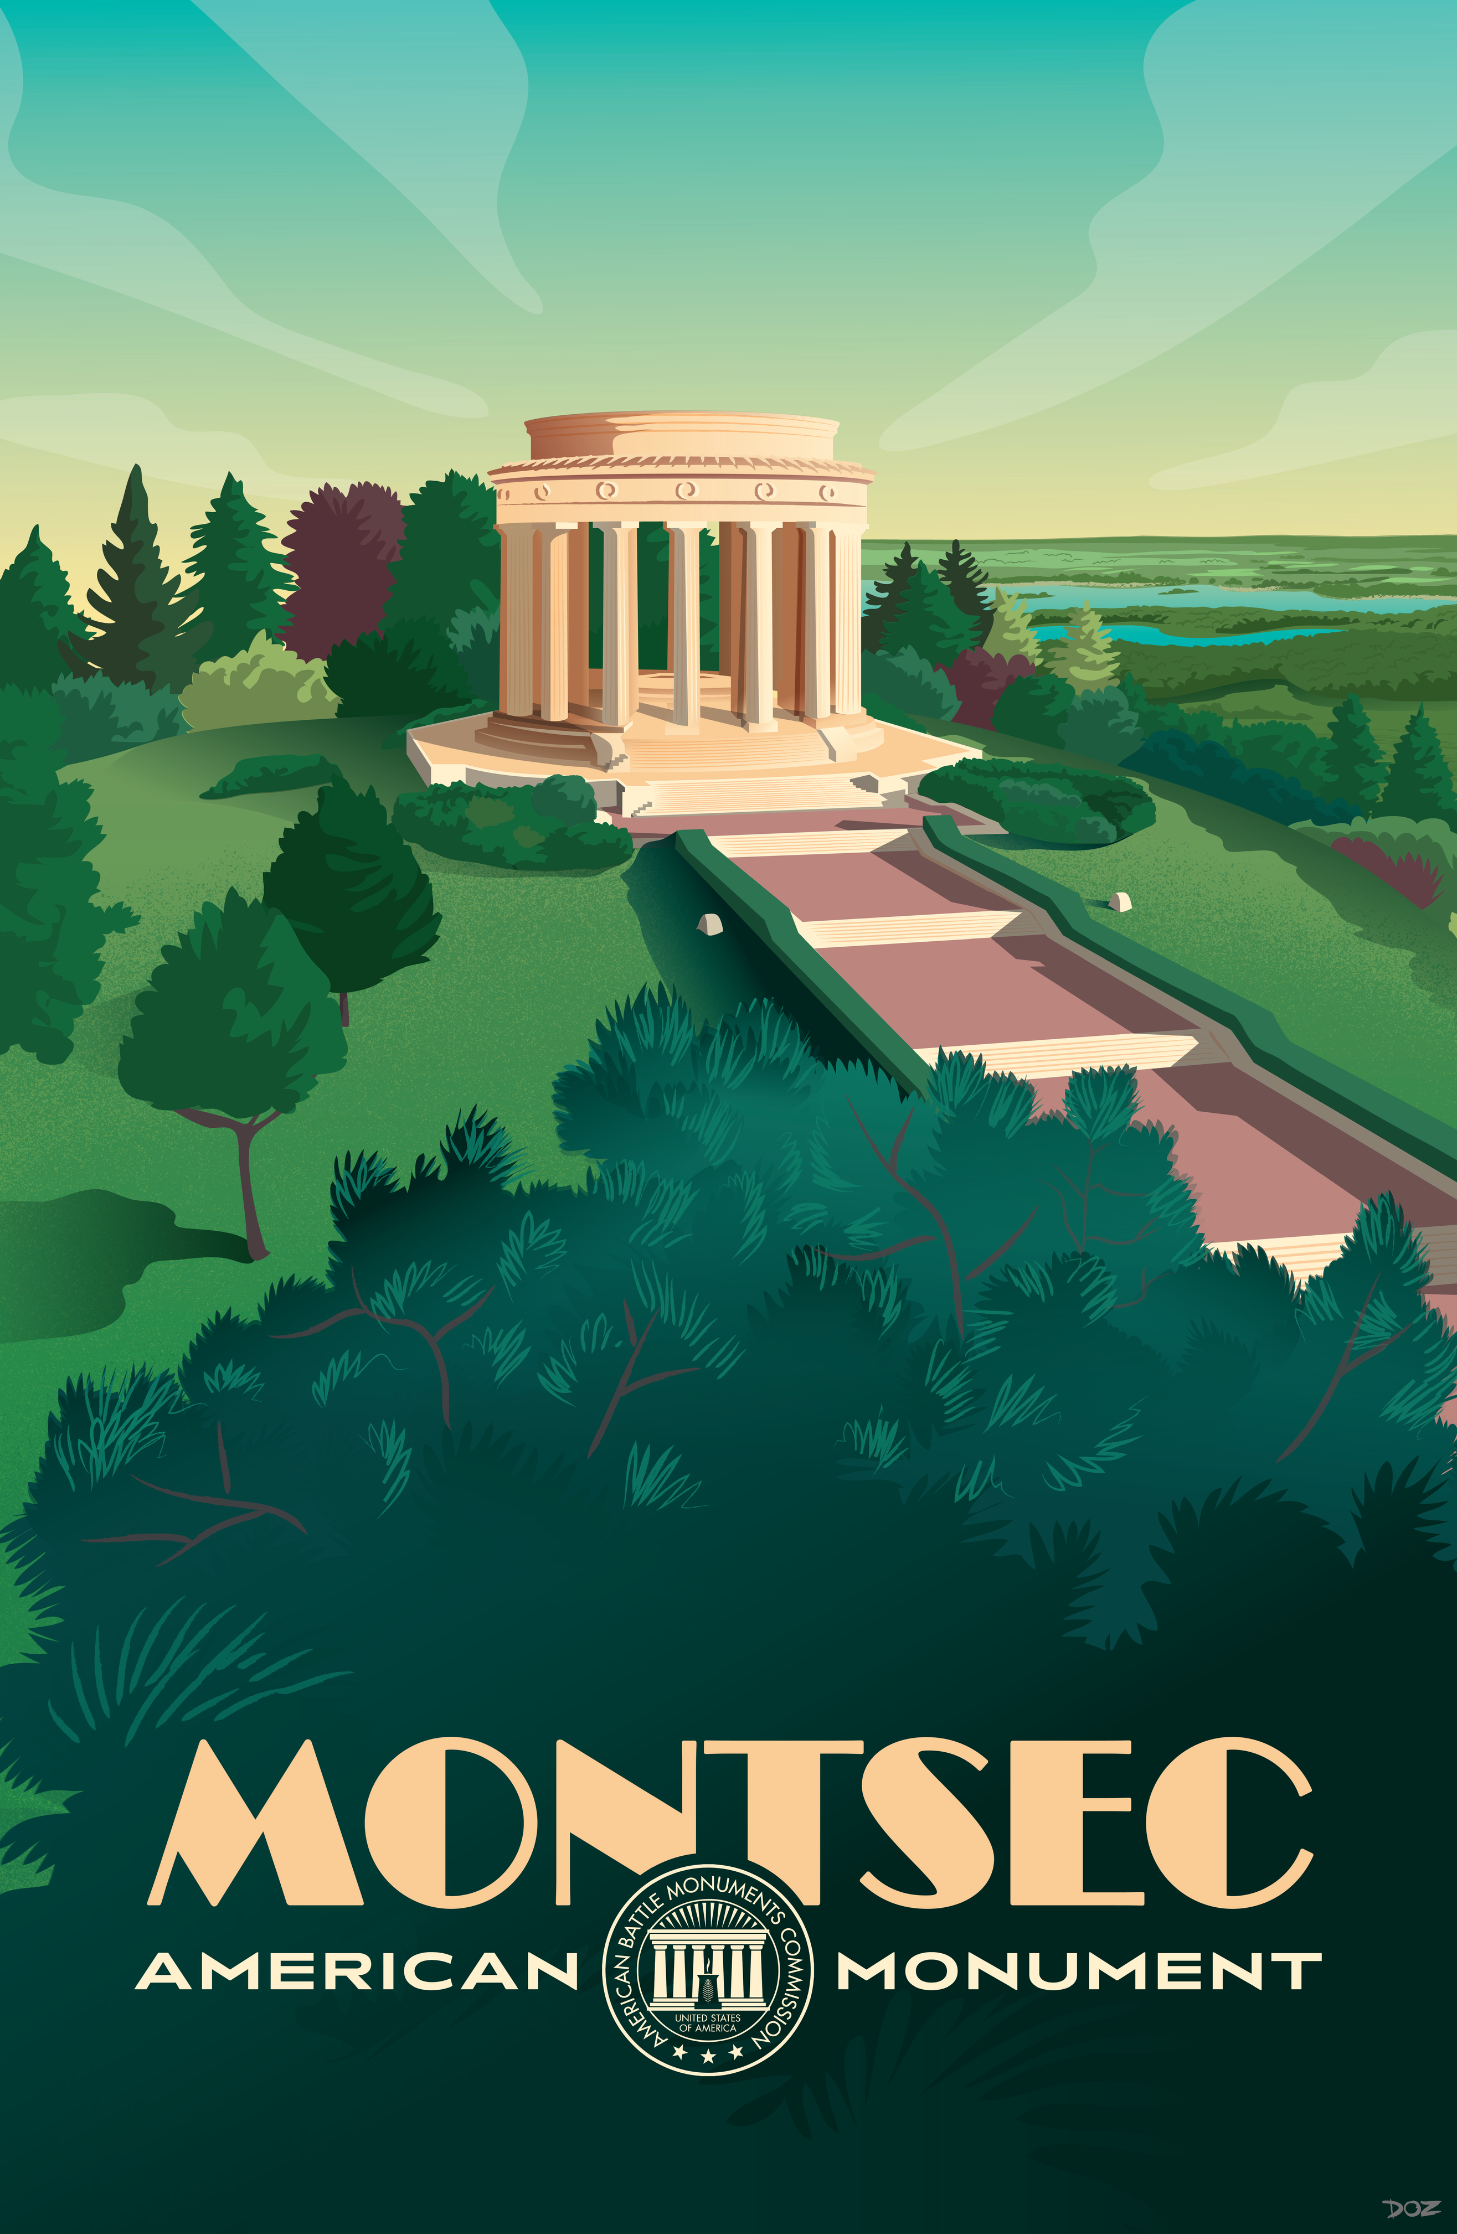 Vintage poster of Montsec American Monument